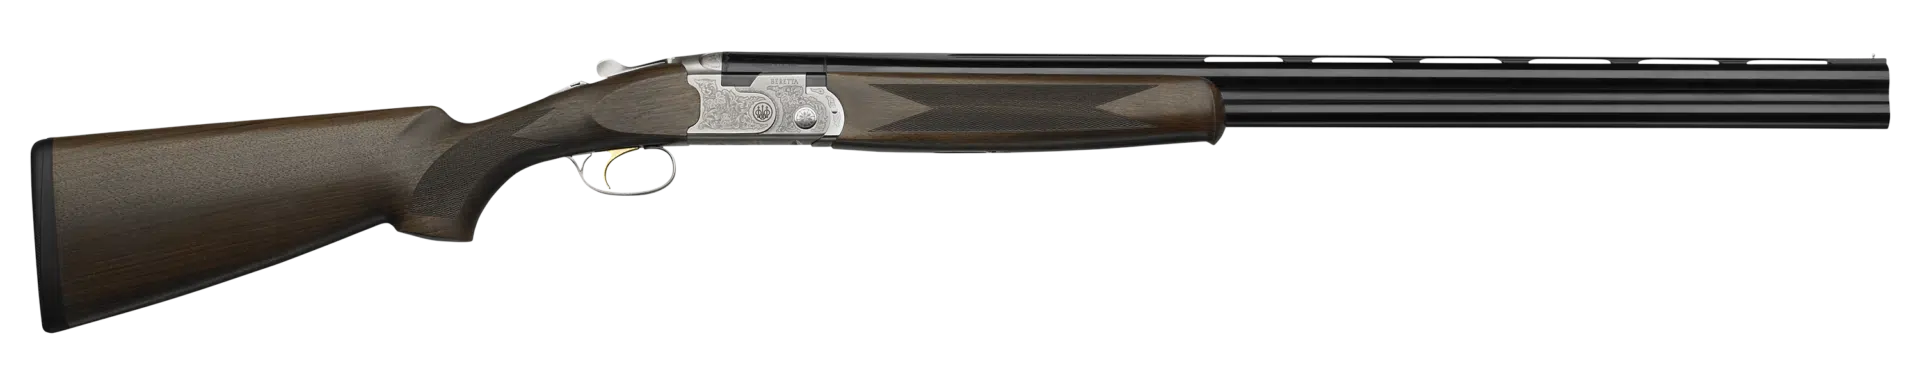 BERETTA - 686 SILVER PIGEON - SPORTING - ADJUSTABLE COMB - 30" - IN STORE NOW